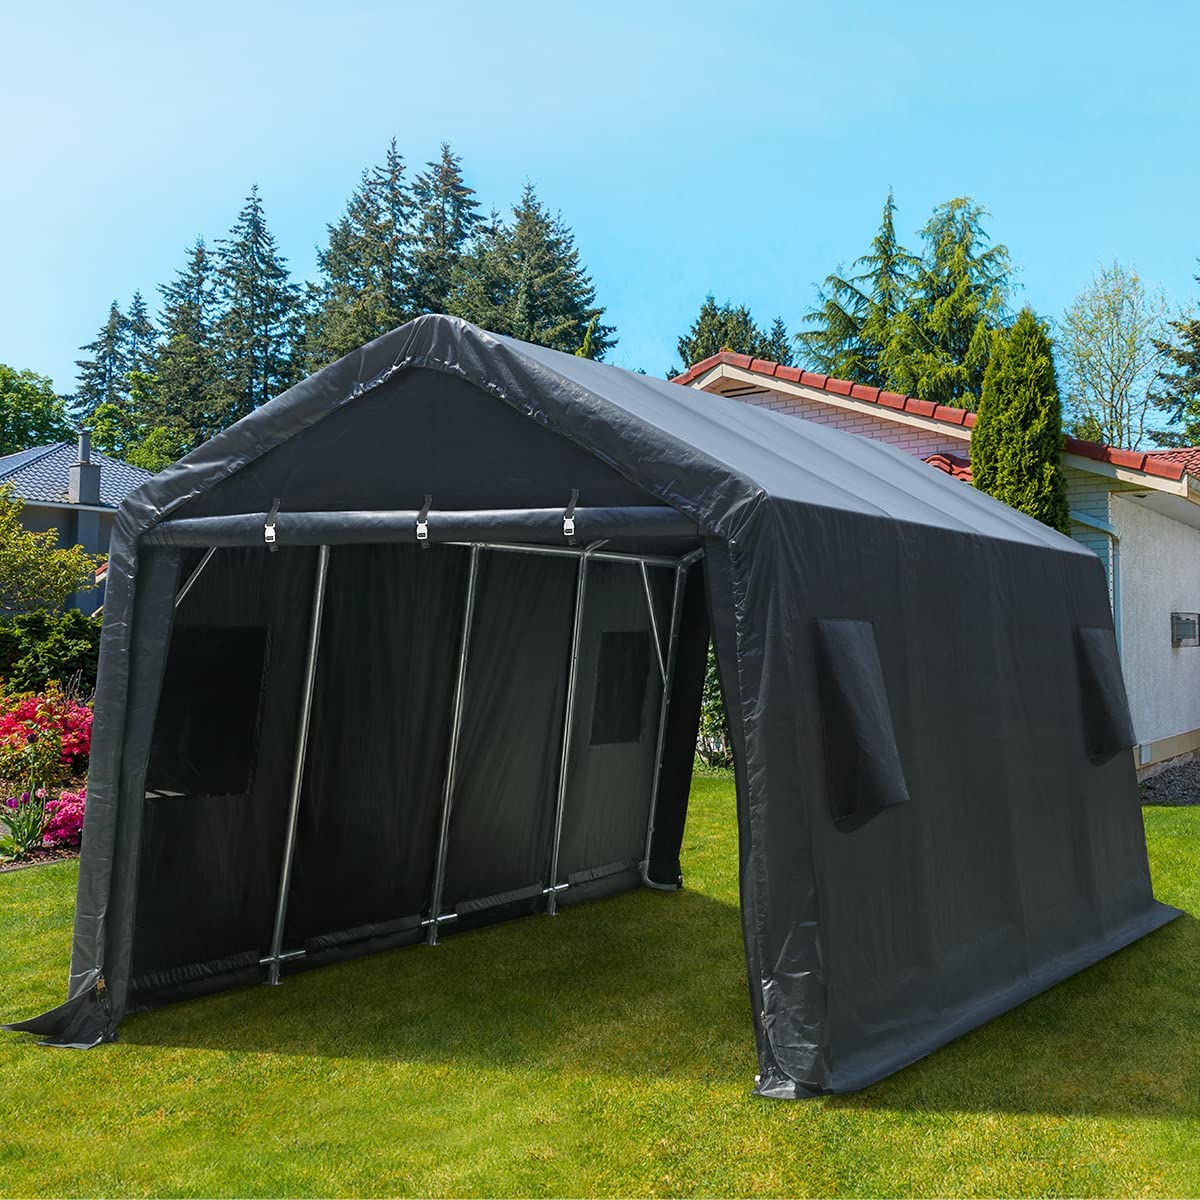 ADVANCE OUTDOOR 10X20 ft Carport Heavy Duty Outdoor Patio Anti-Snow Portable Canopy Storage Shelter Shed with 2 Rolled up Zipper Doors & Vents for Snowmobile Garden Tools, Gray, (8808DGY-1) 10'x20' Dark Gray